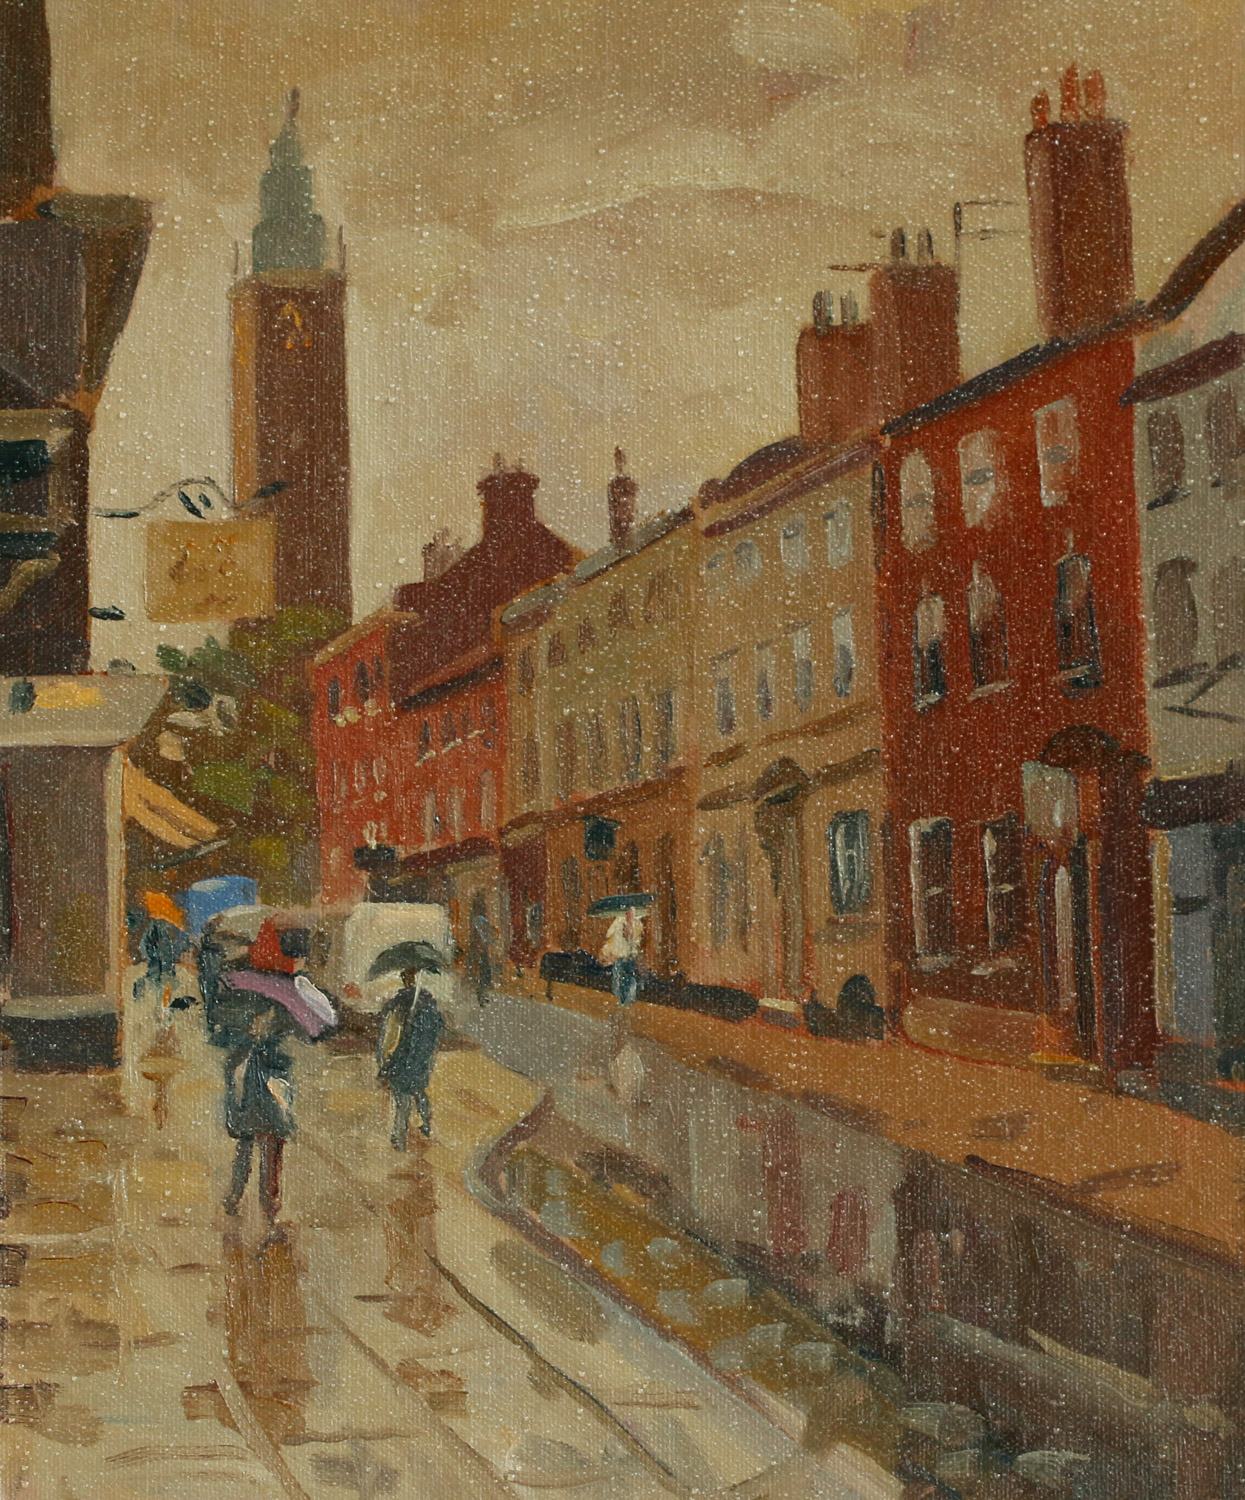 Artist Rod Major - Rainy Day, St Giles, £275 12x10 Oil on Board at Paint Out Norwich 2015